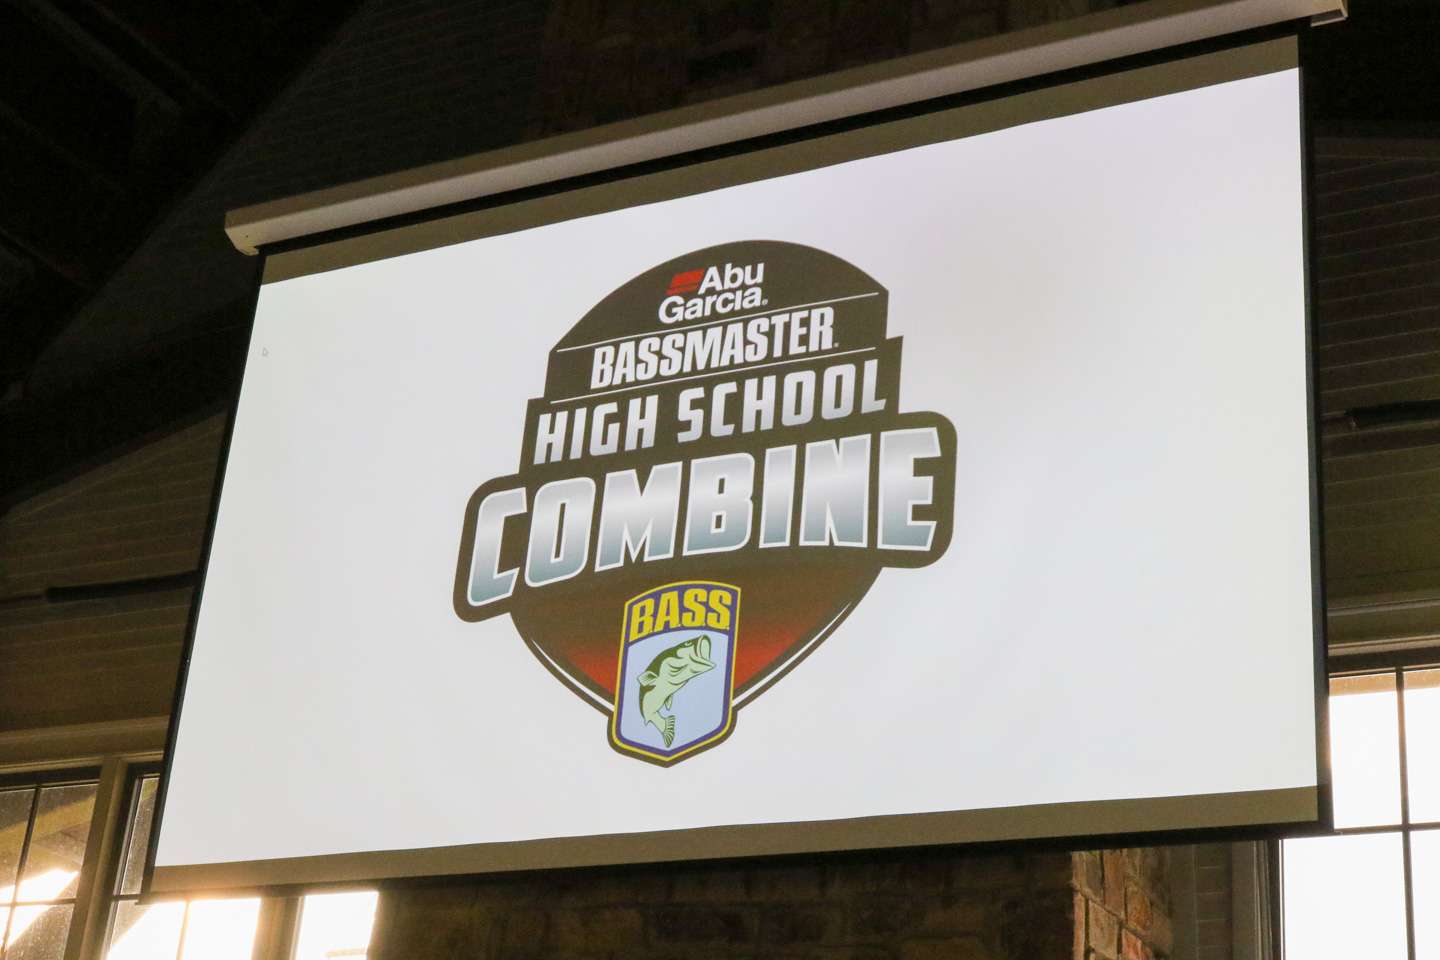 Take a look at the sights from registration at the Abu Garcia Bassmaster High School Combine! 